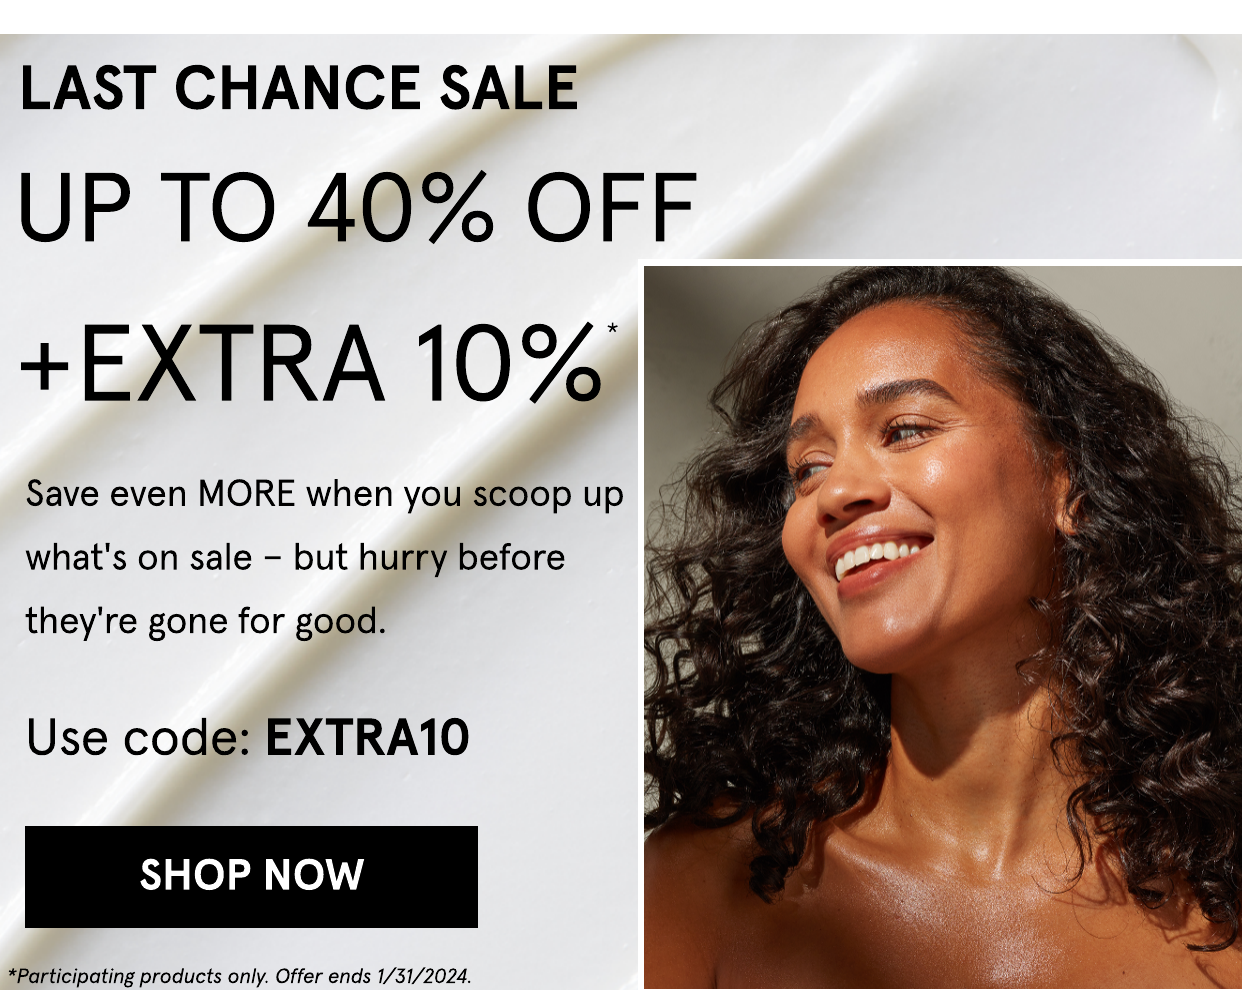 Last Chance up to 40% off + extra 10% off Use code: EXTRA10